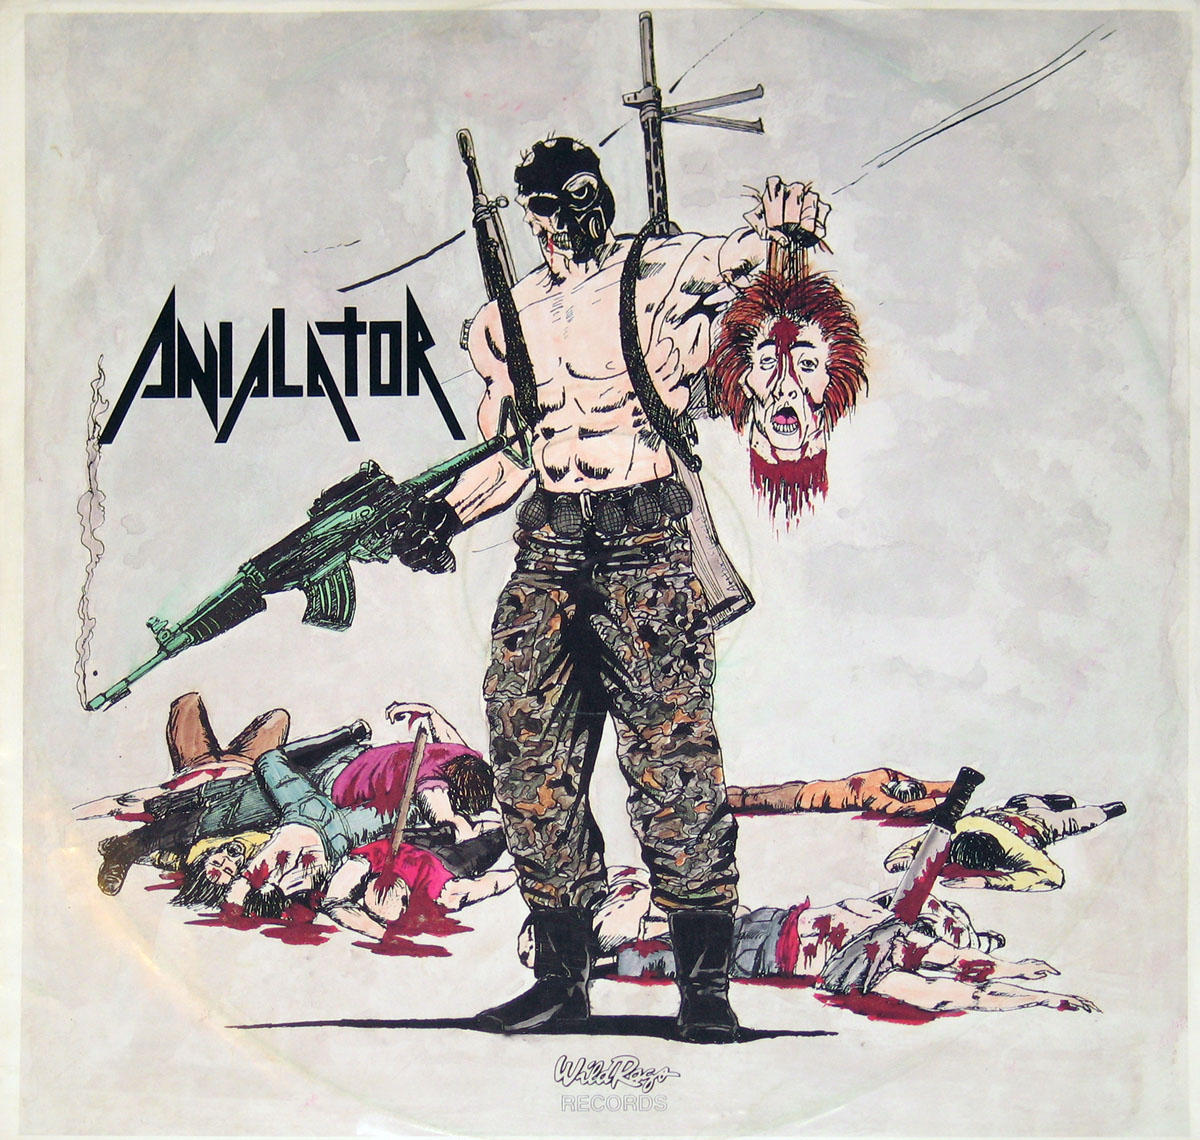 large photo of the album front cover 